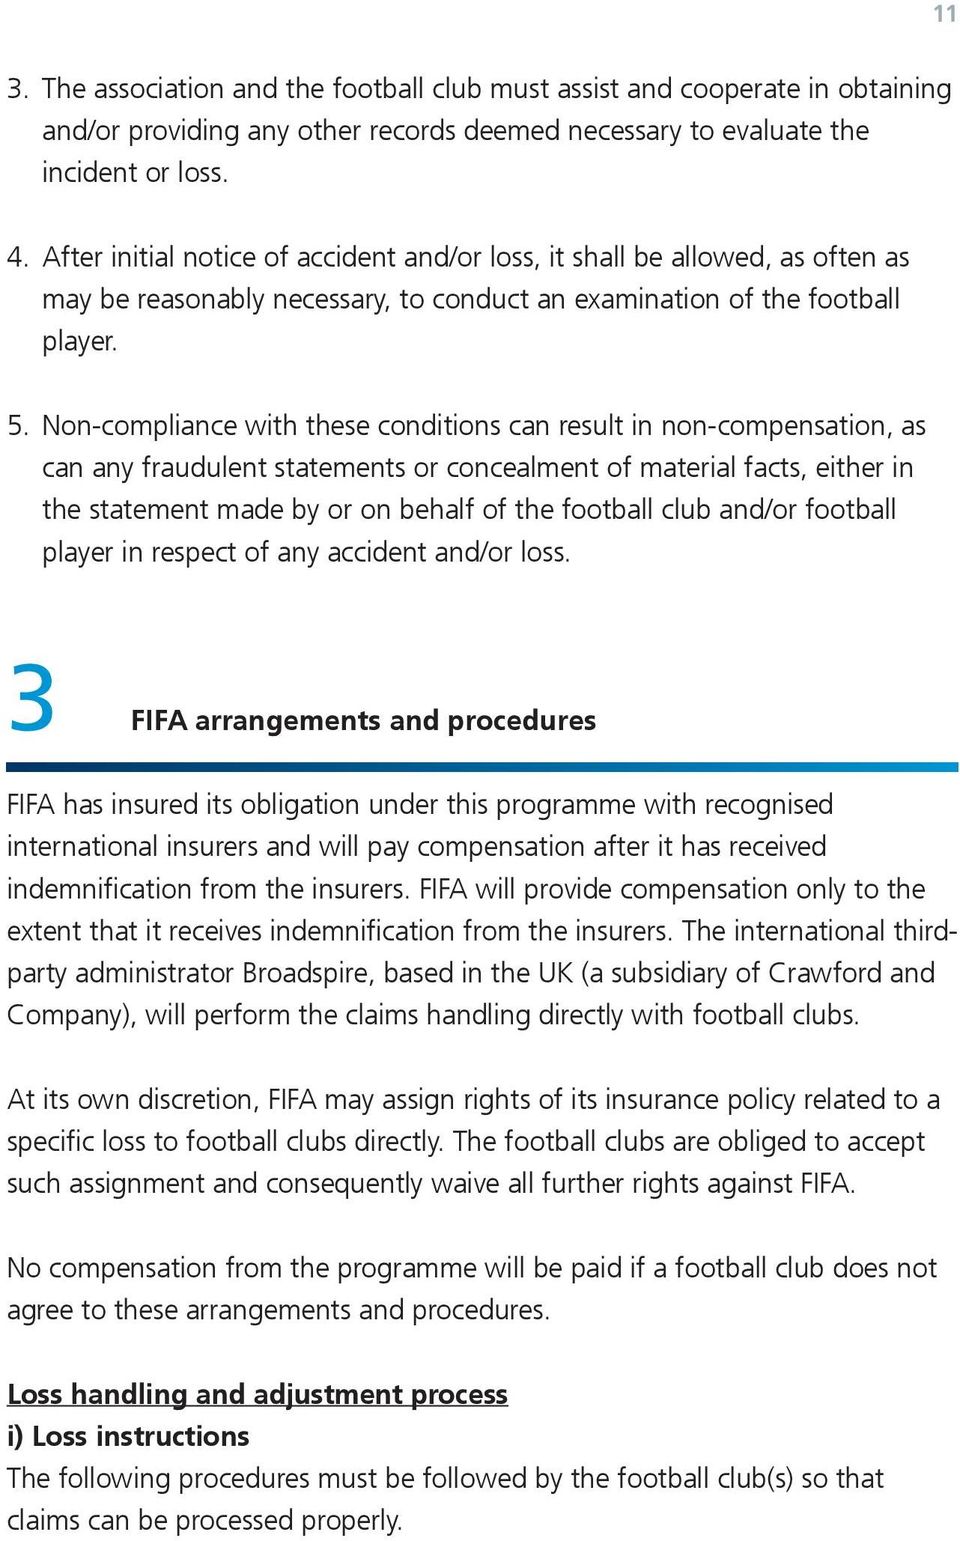 Non-compliance with se conditions can result in non-compensation, as can any fraudulent statements or concealment material facts, eir in statement made by or on behalf football club /or football